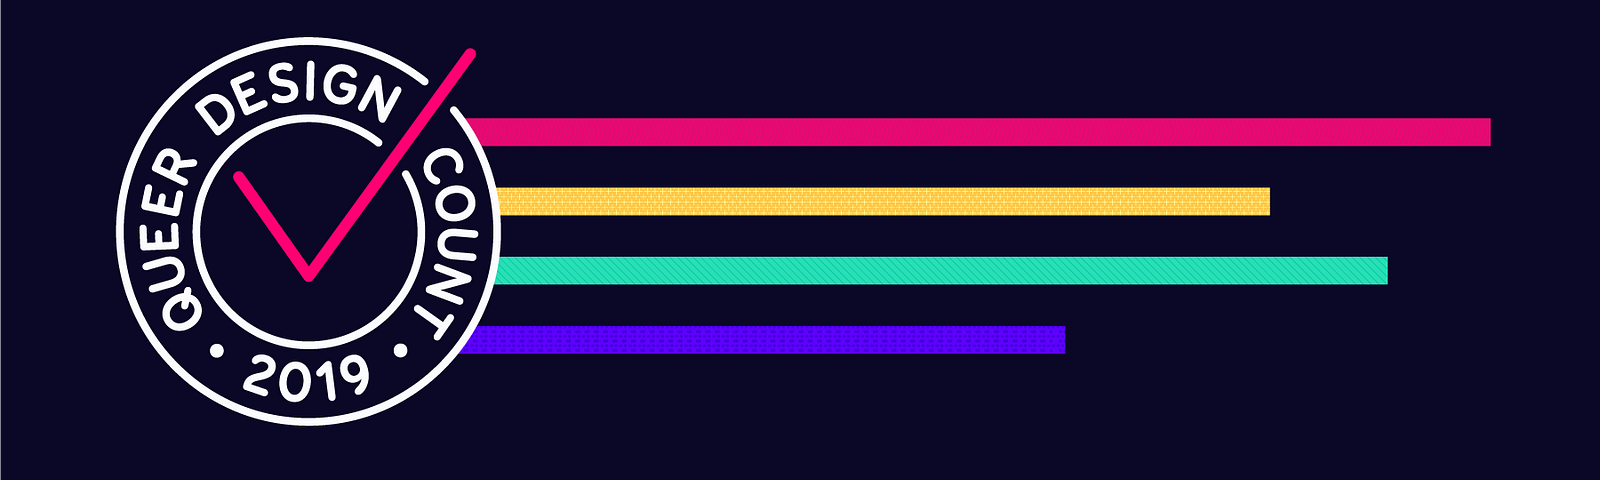 The queer design count 2019 banner